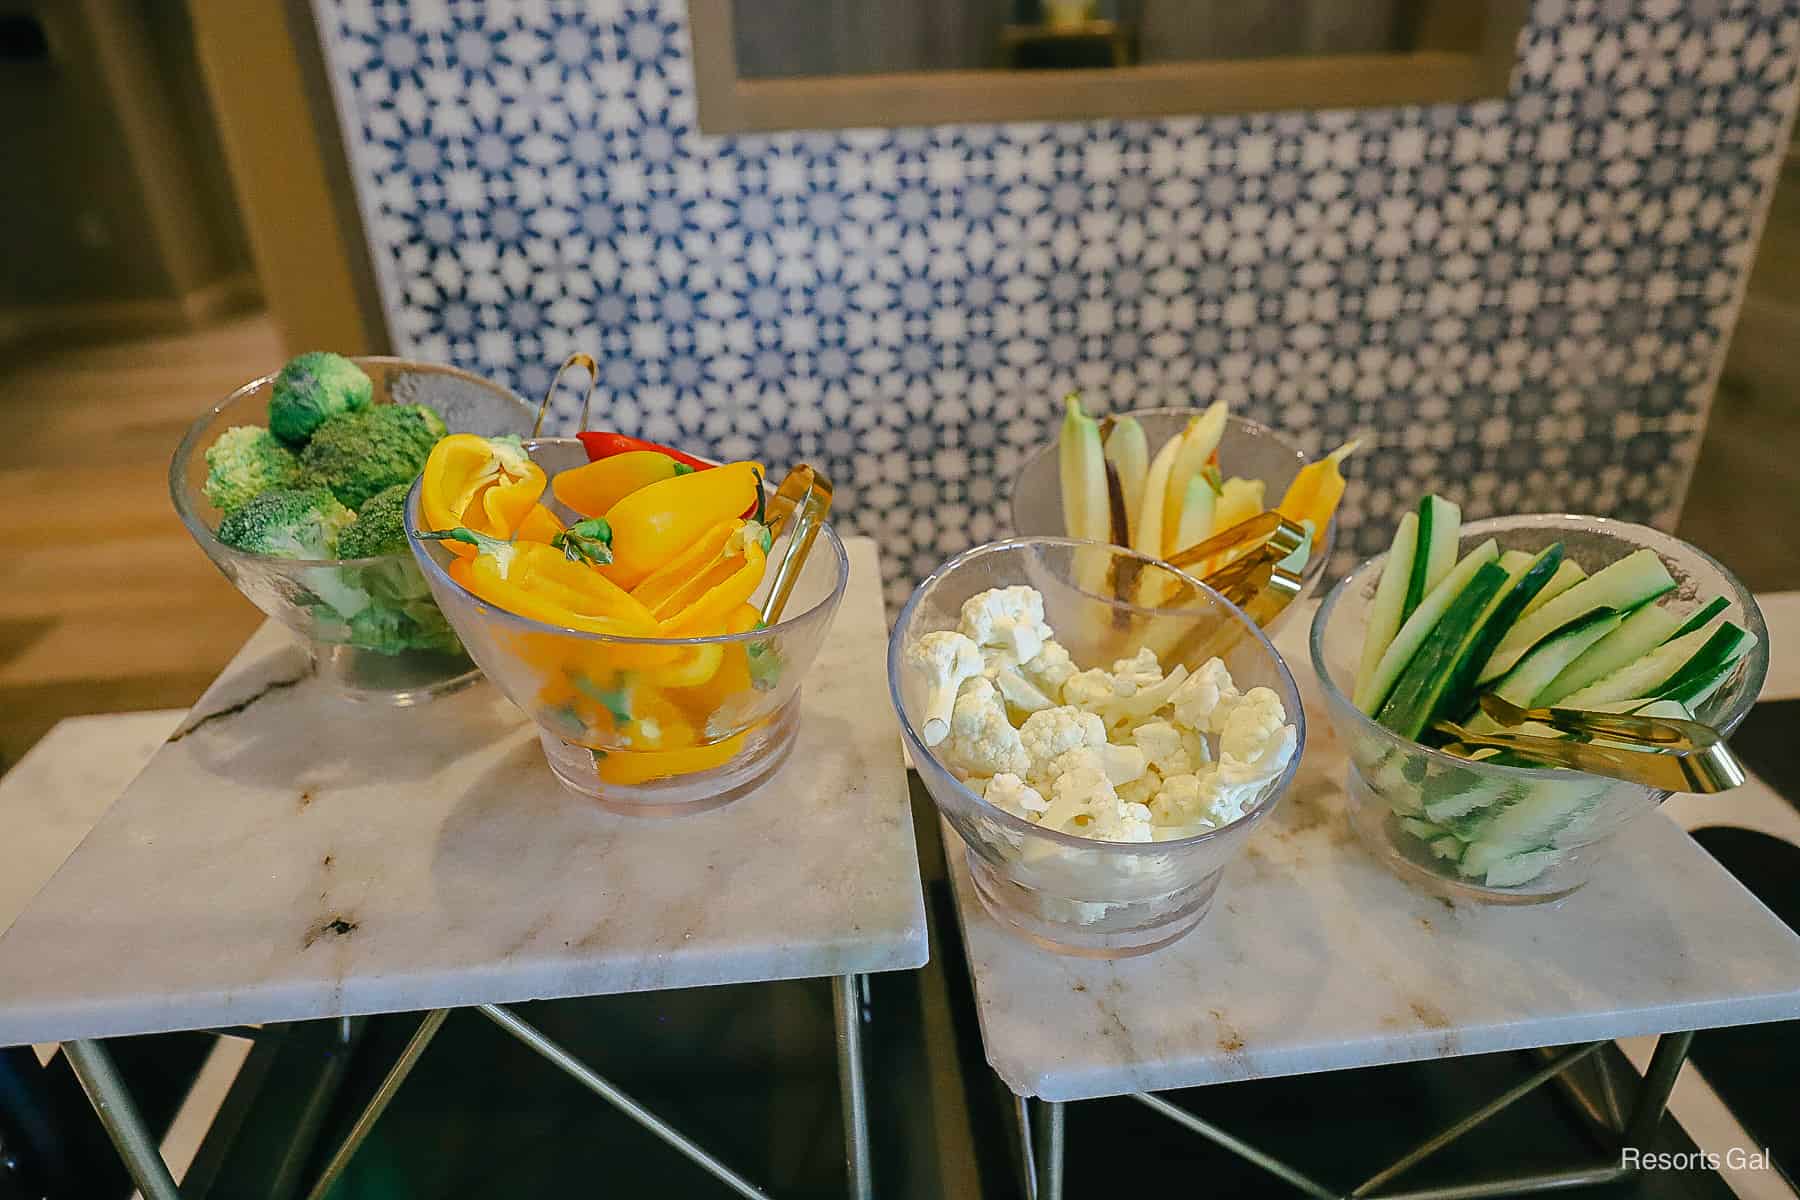 dishes with broccoli, peppers, cauliflowers, zucchini, and rainbow carrots 